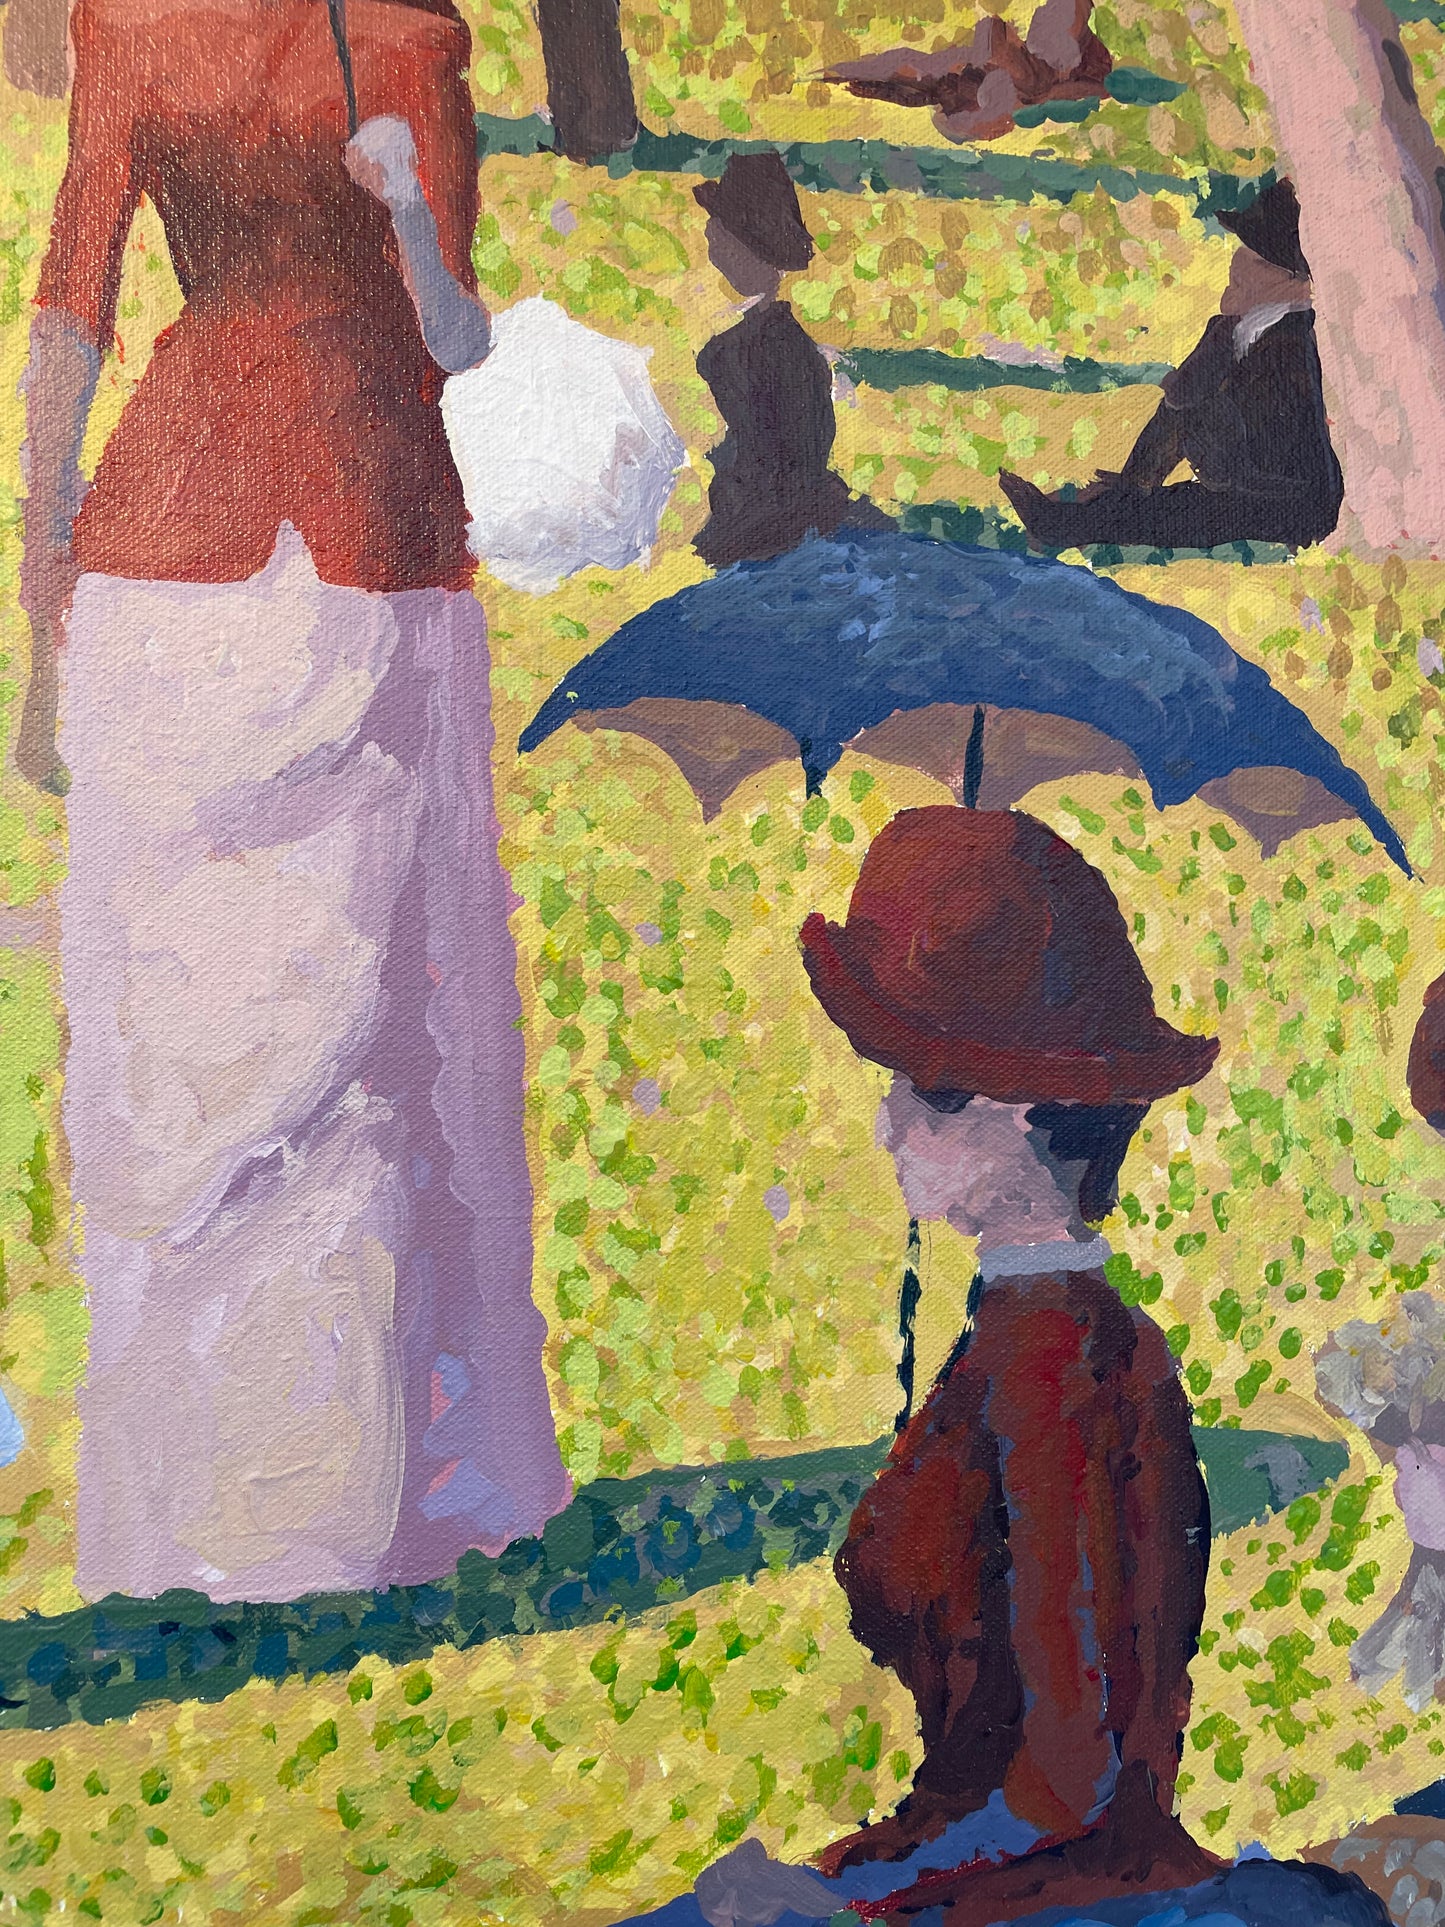 Georges Seurat "A Sunday Afternoon..." Painting on Canvas Reproduction (20573)